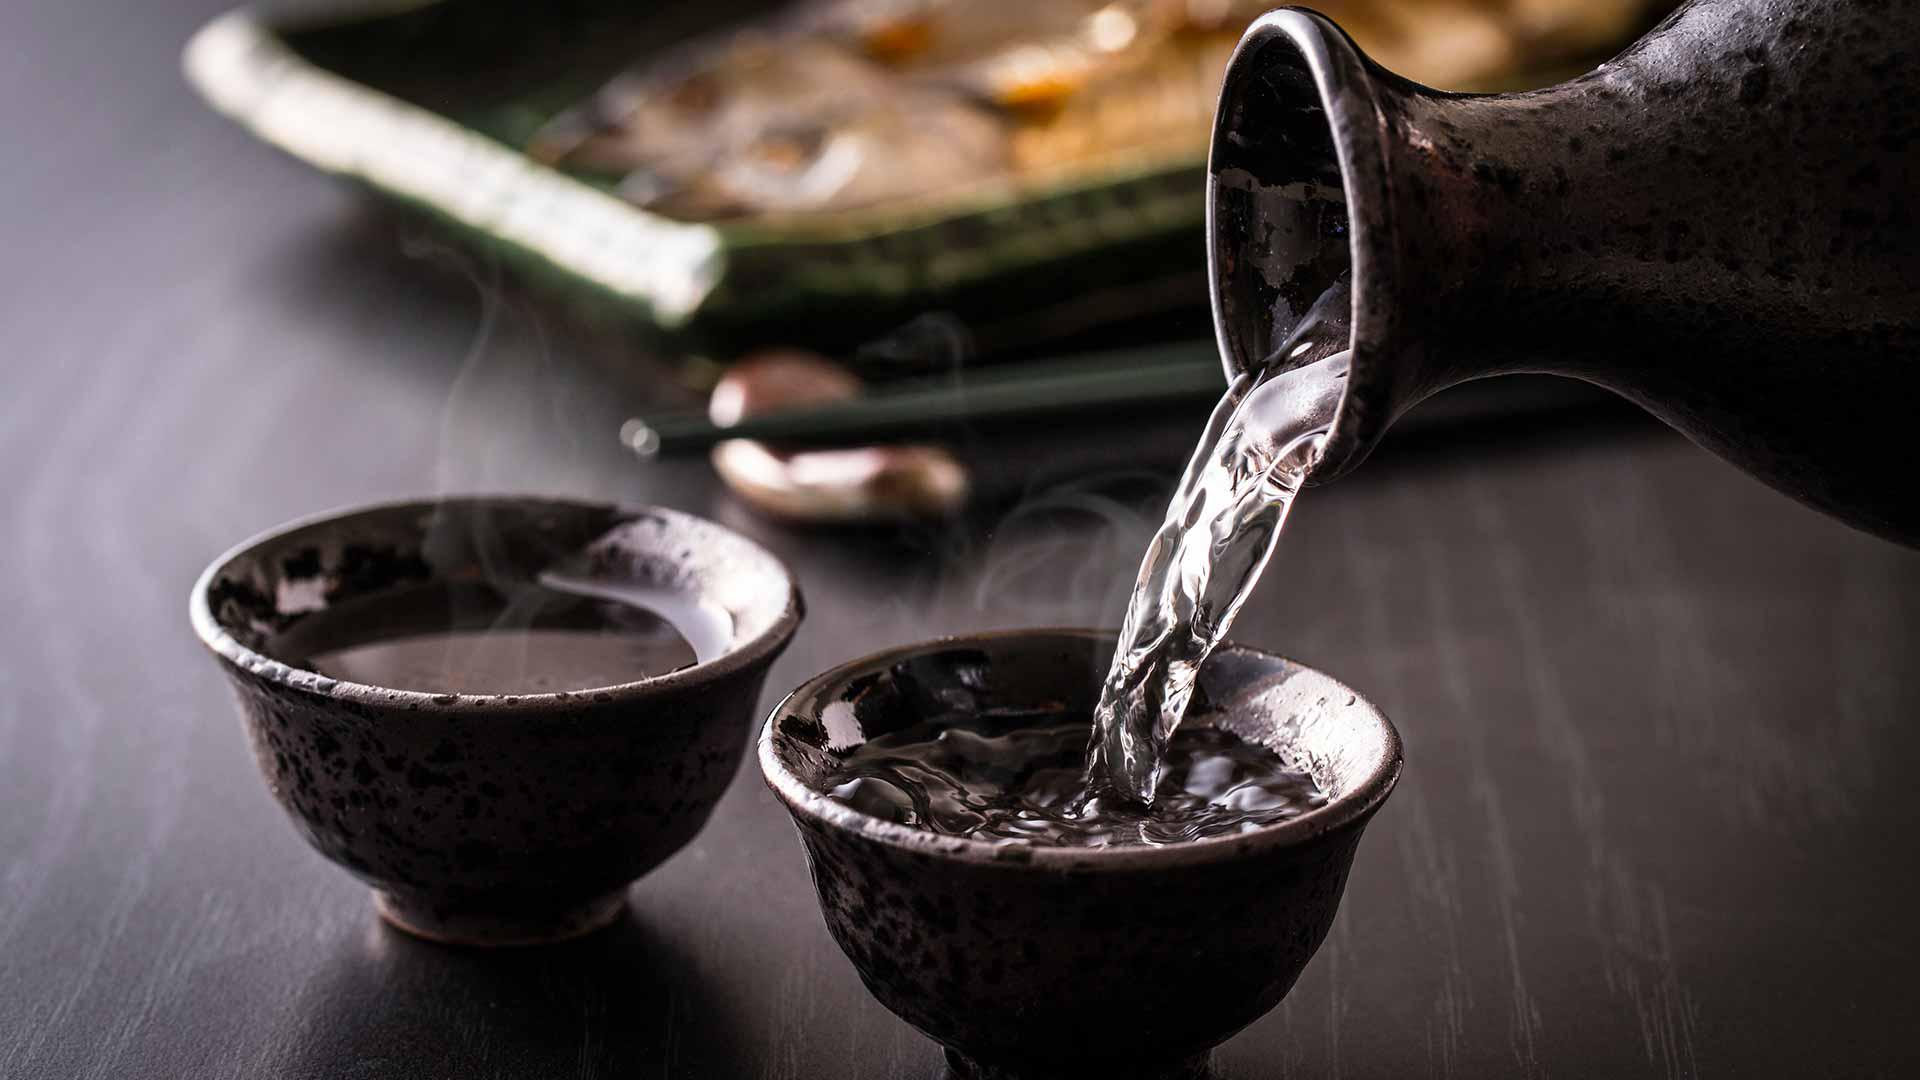 Everything You Need to Know About Japanese SAKE in Under 15 Minutes! 